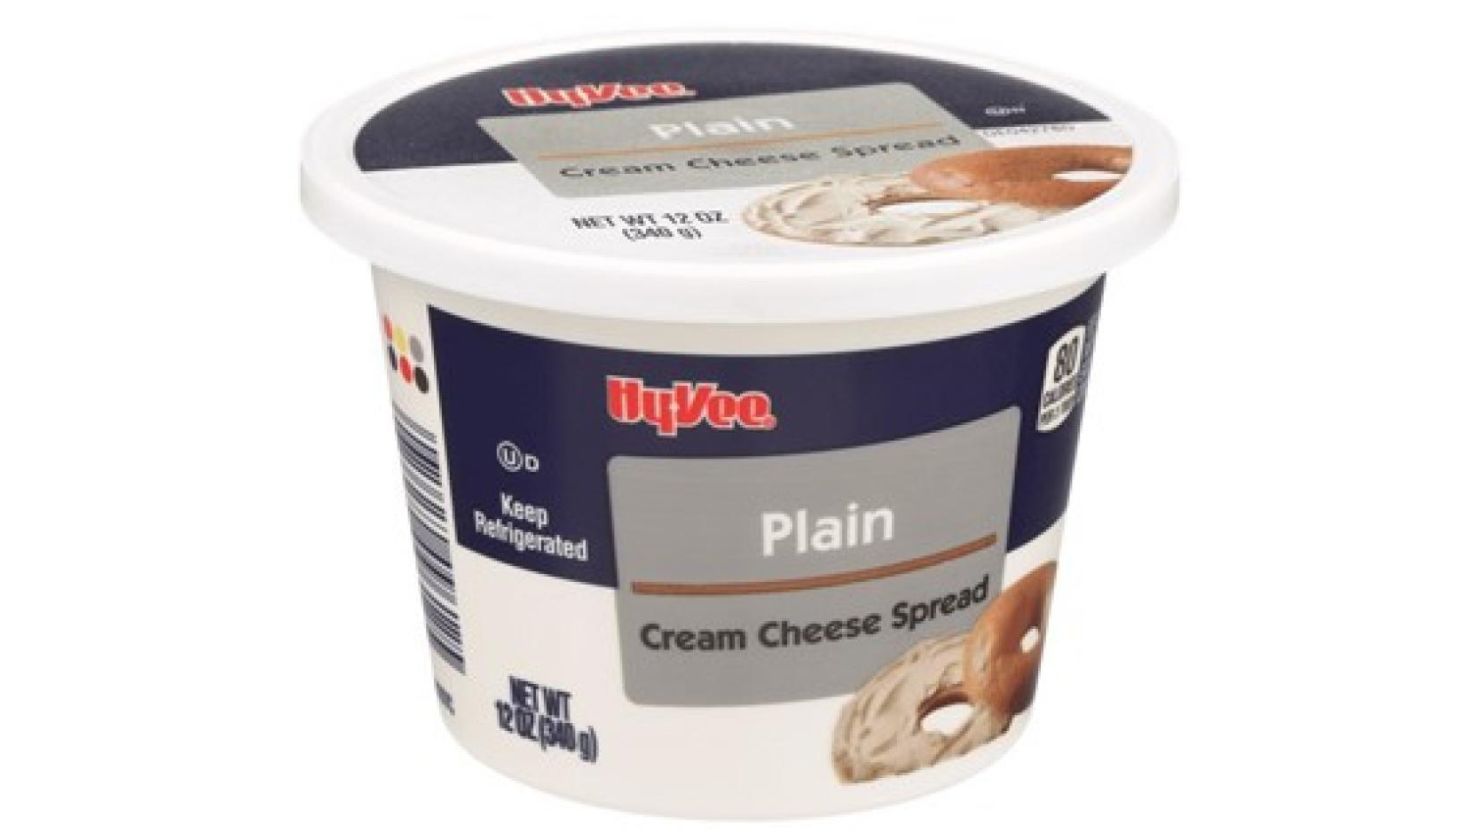 Hy-Vee is recalling some cream cheese products due to potential contamination with salmonella.